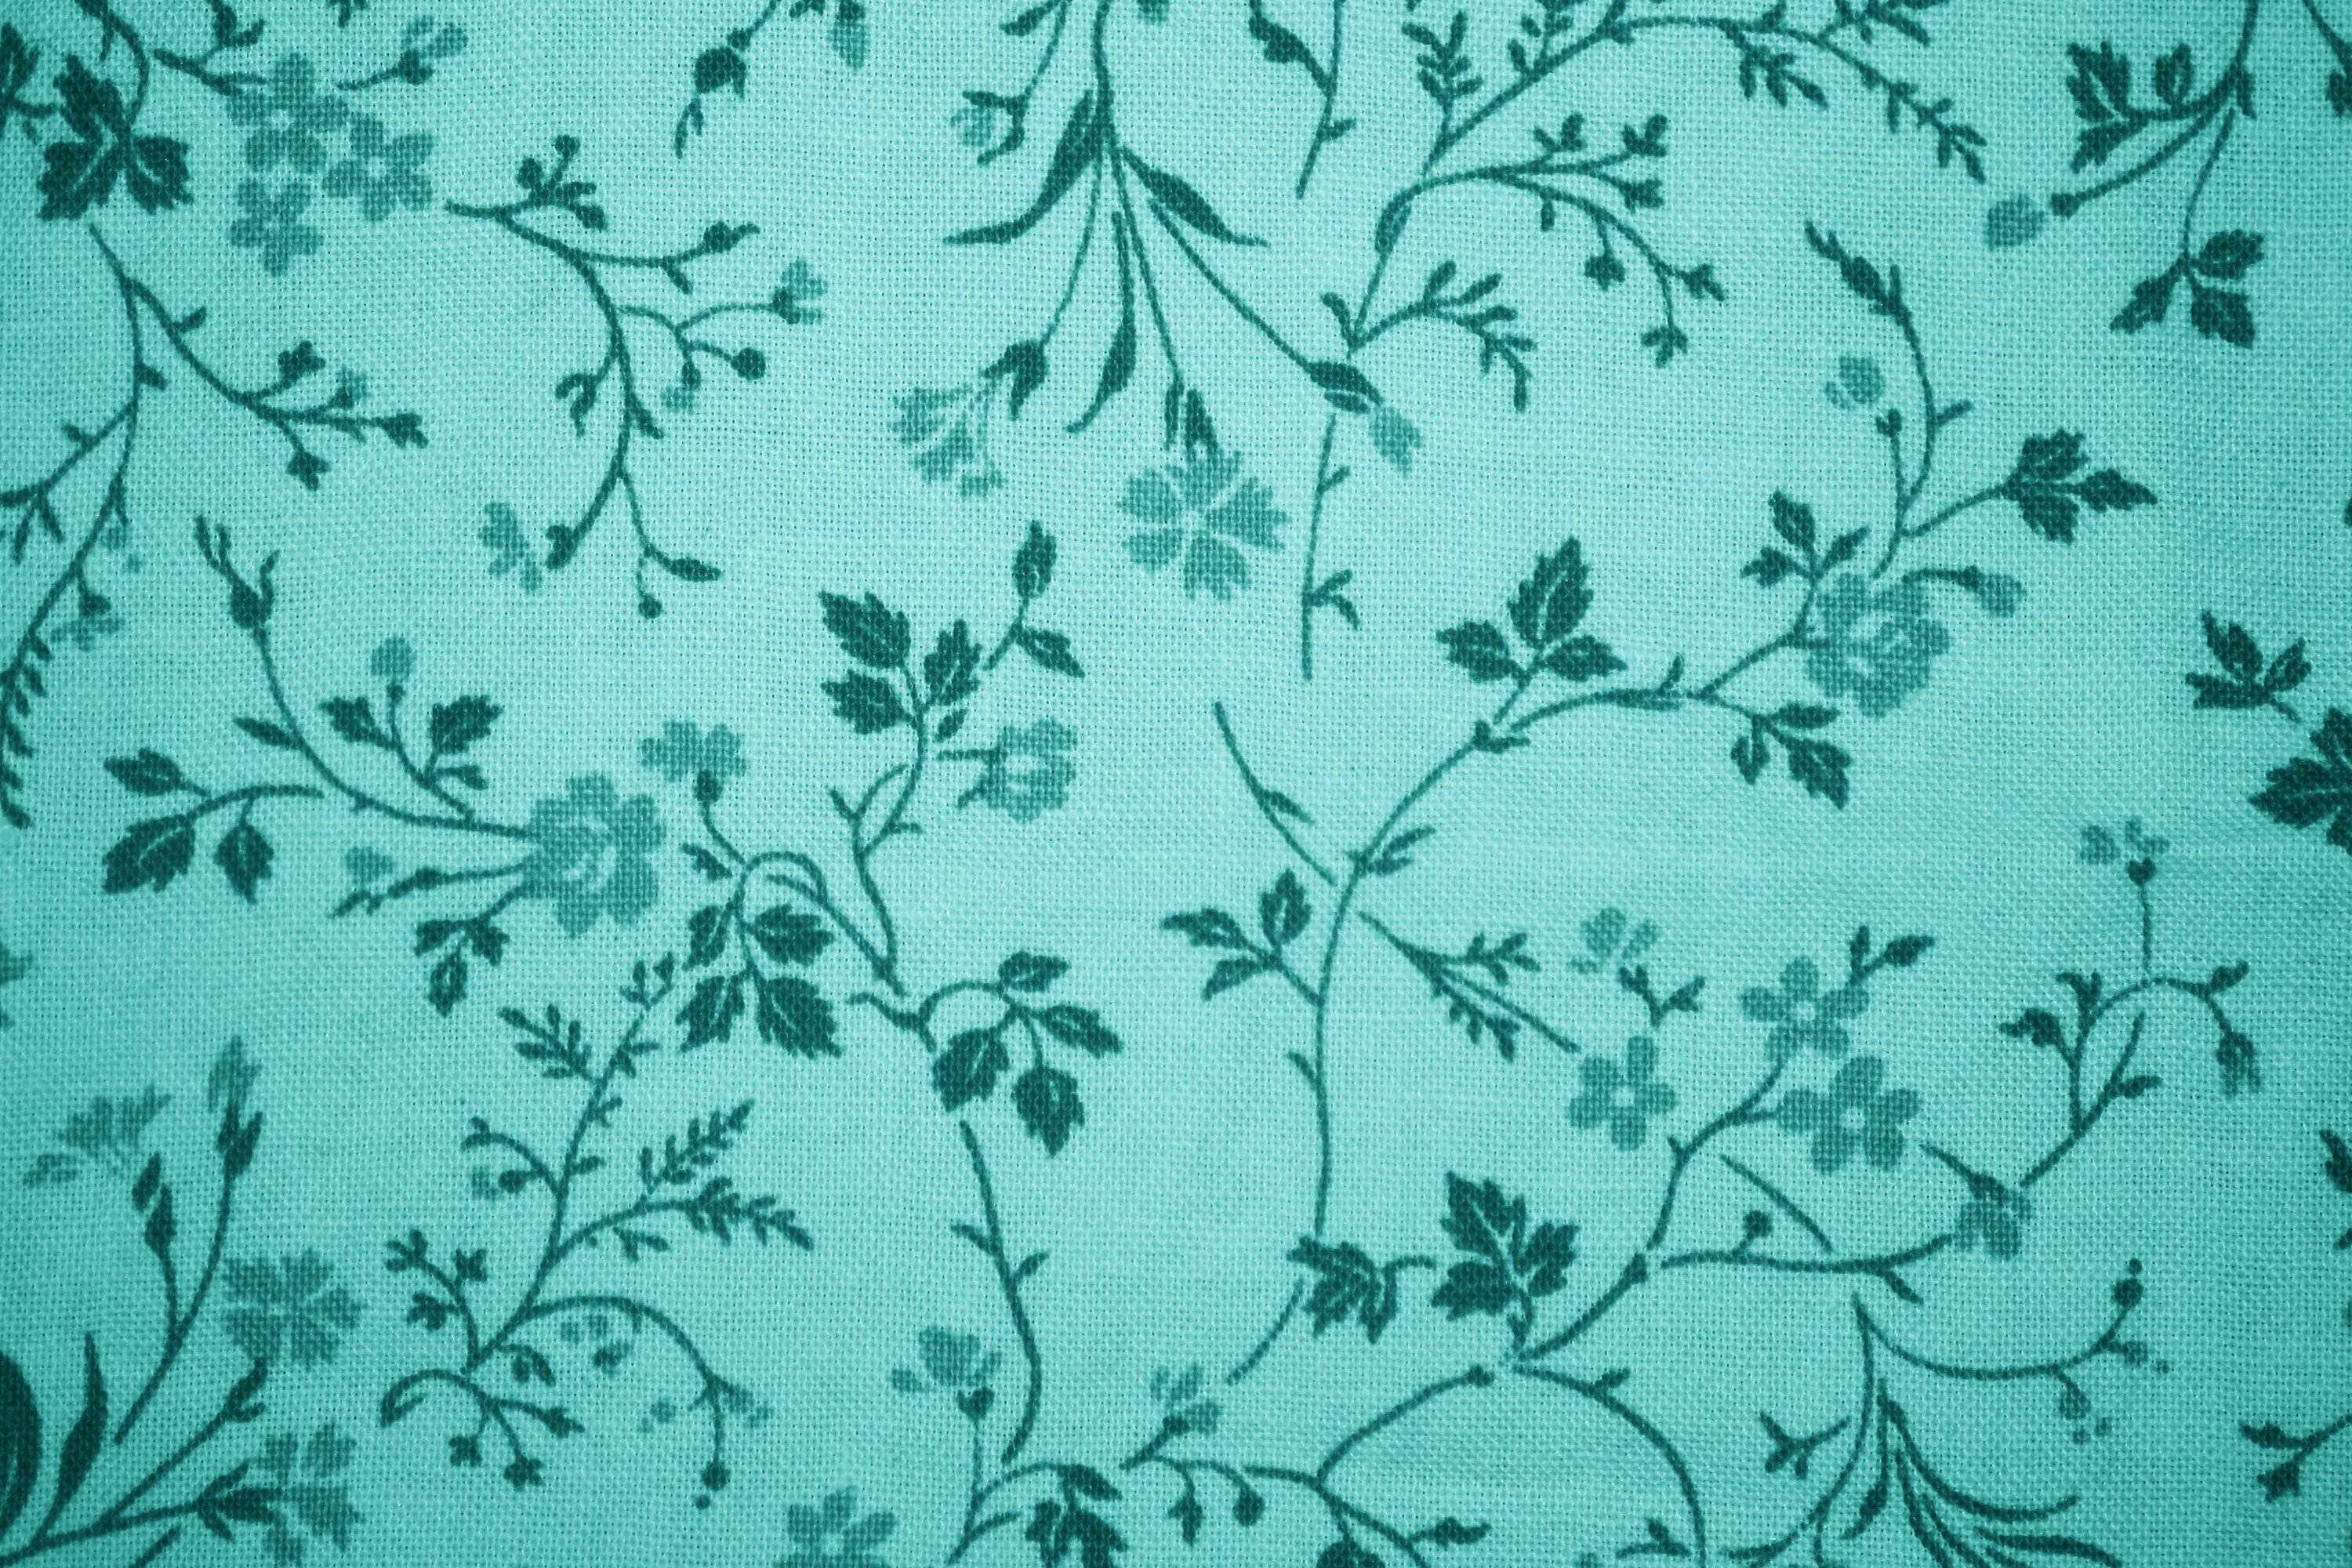 Teal Pattern Wallpapers